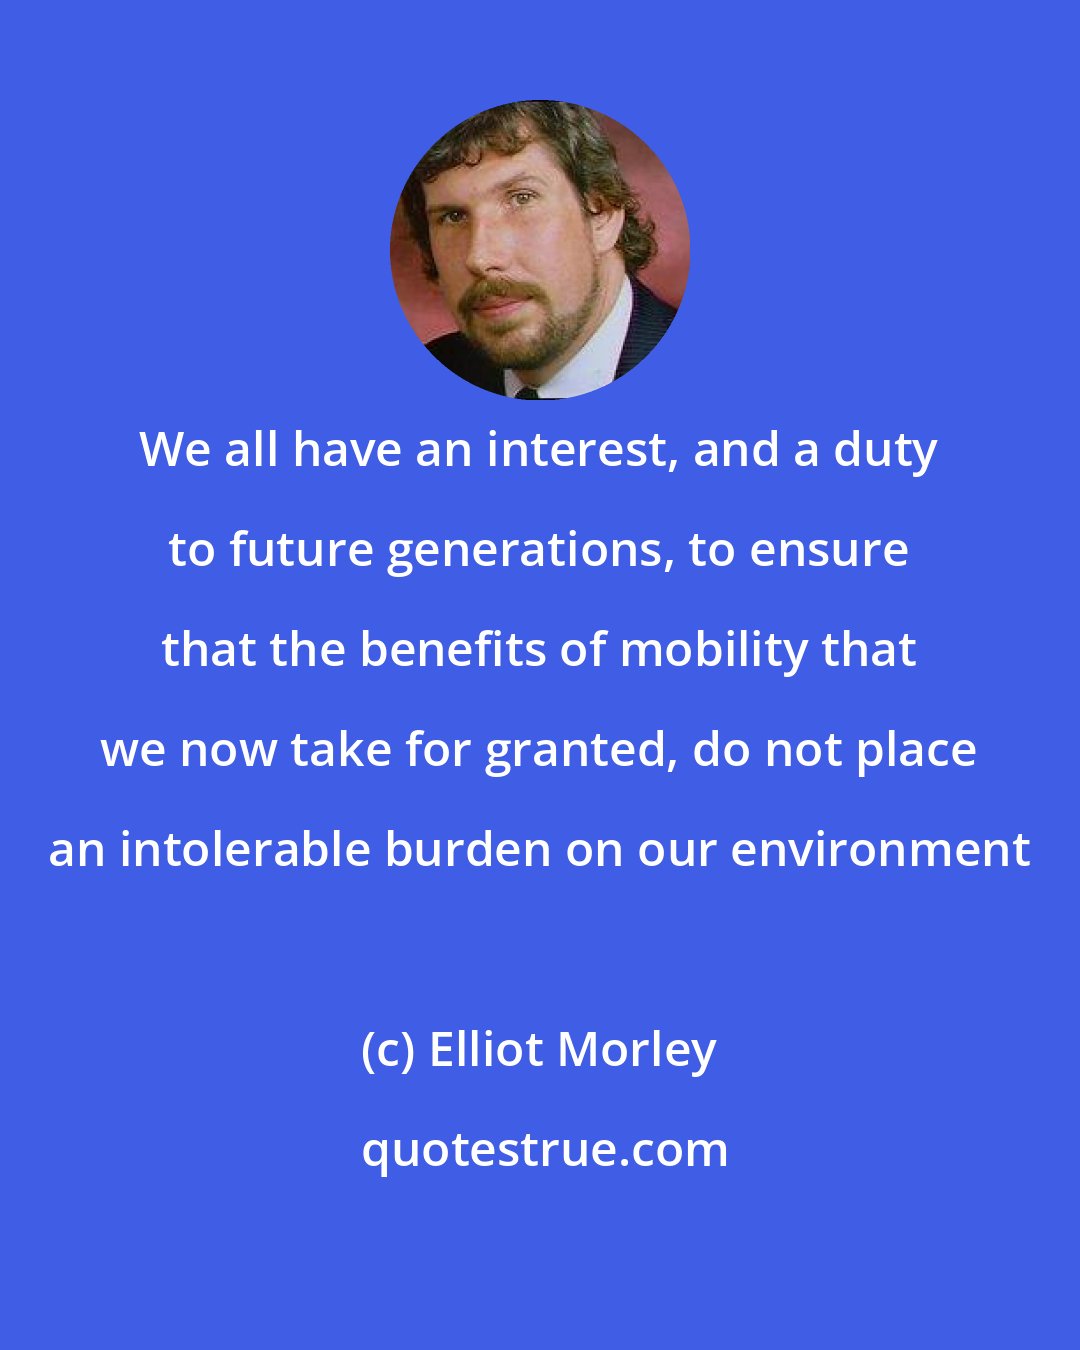 Elliot Morley: We all have an interest, and a duty to future generations, to ensure that the benefits of mobility that we now take for granted, do not place an intolerable burden on our environment